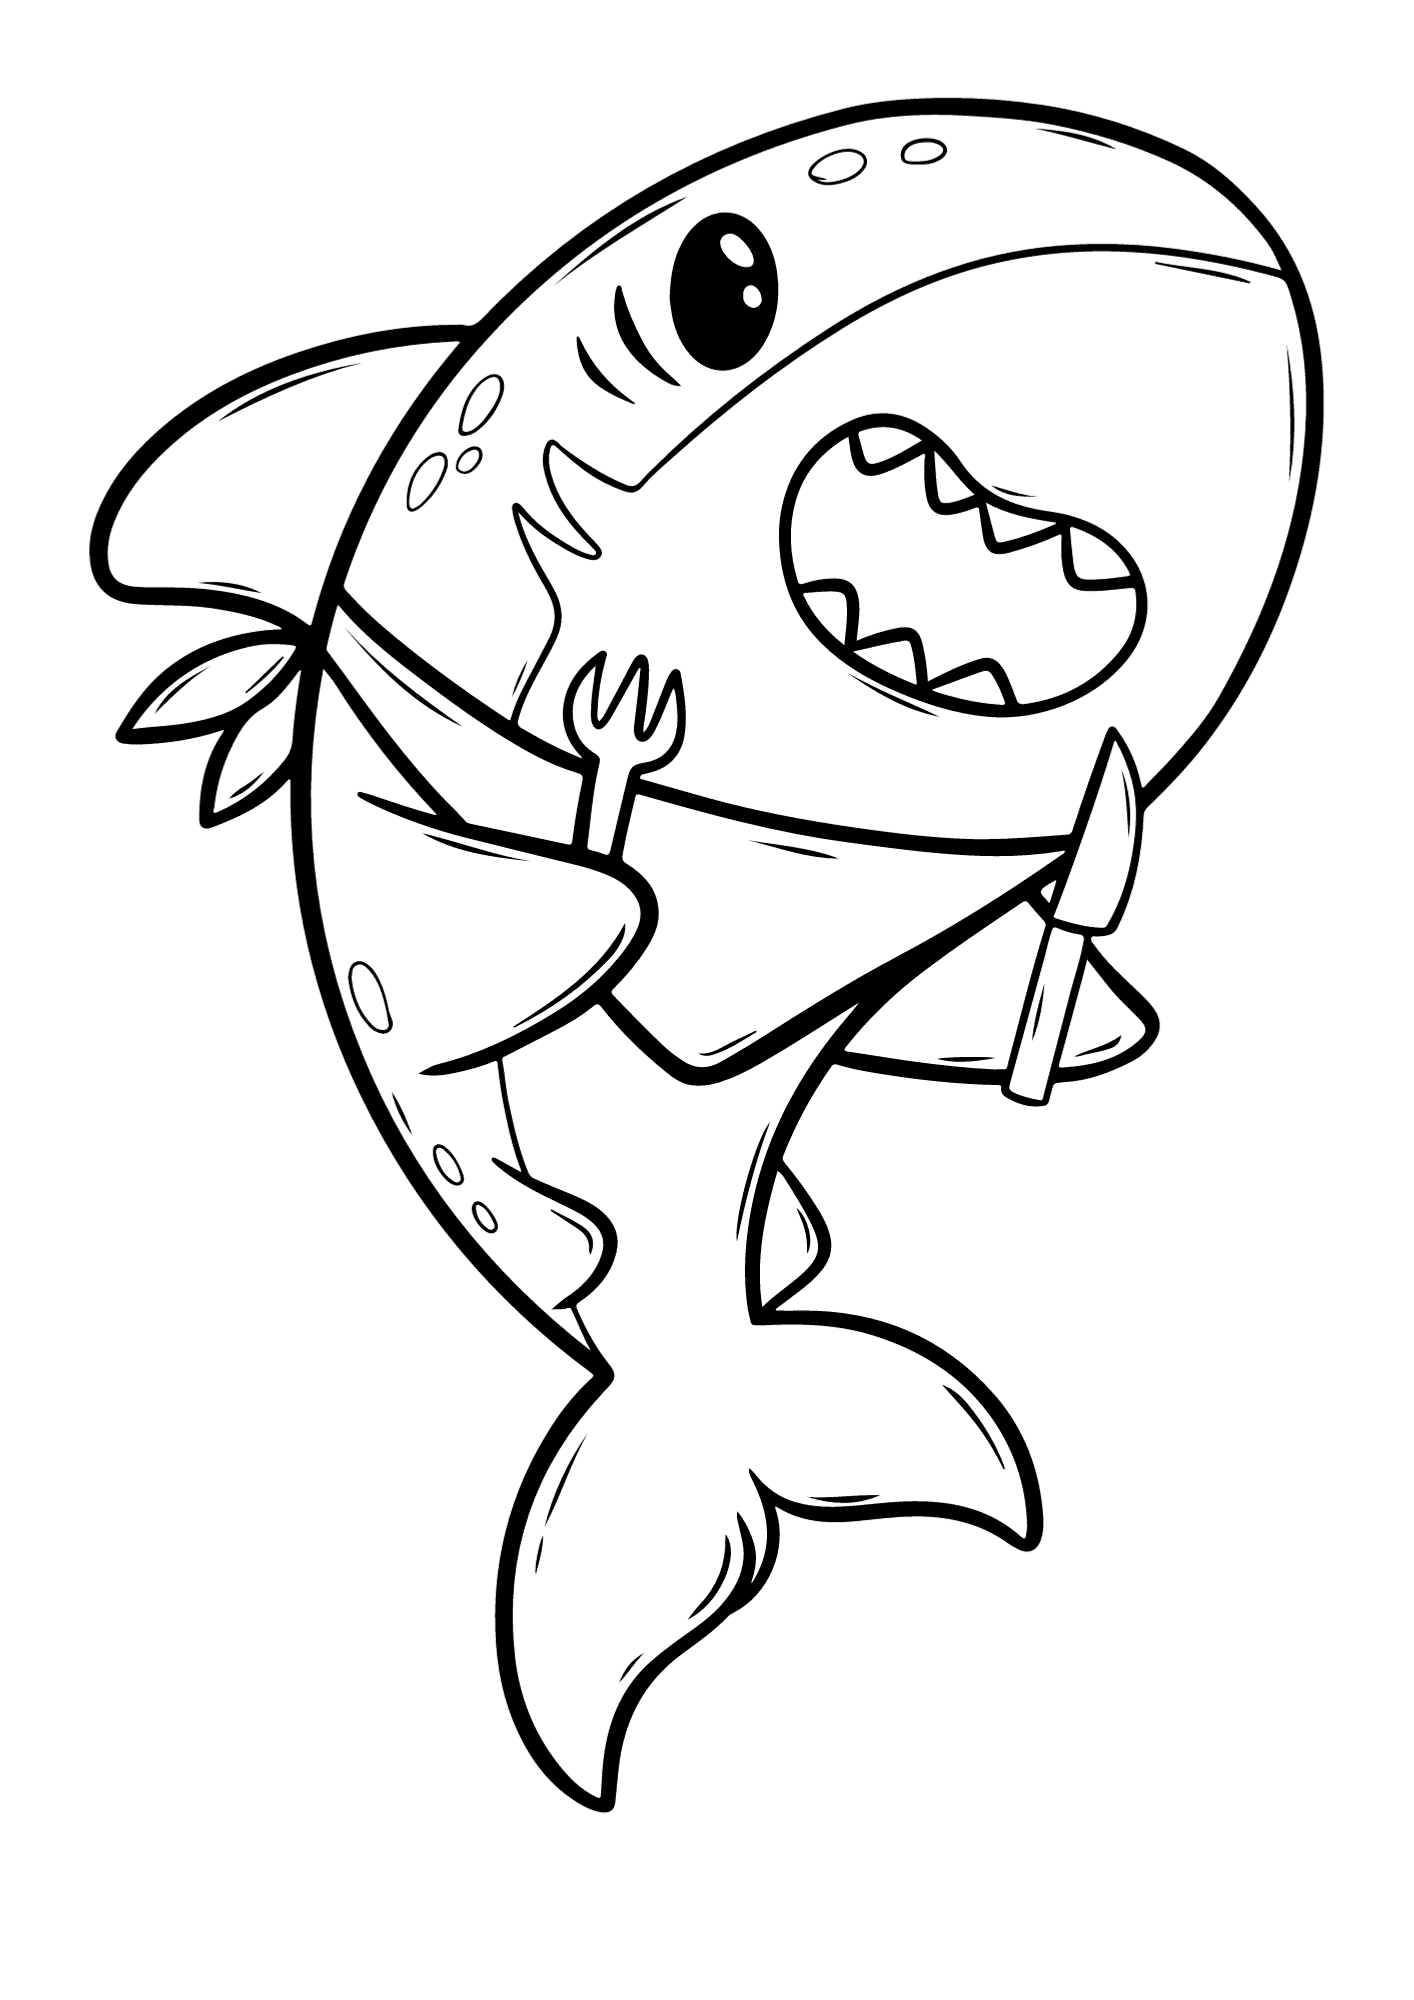 Cute Sharks Cartoon Coloring Page